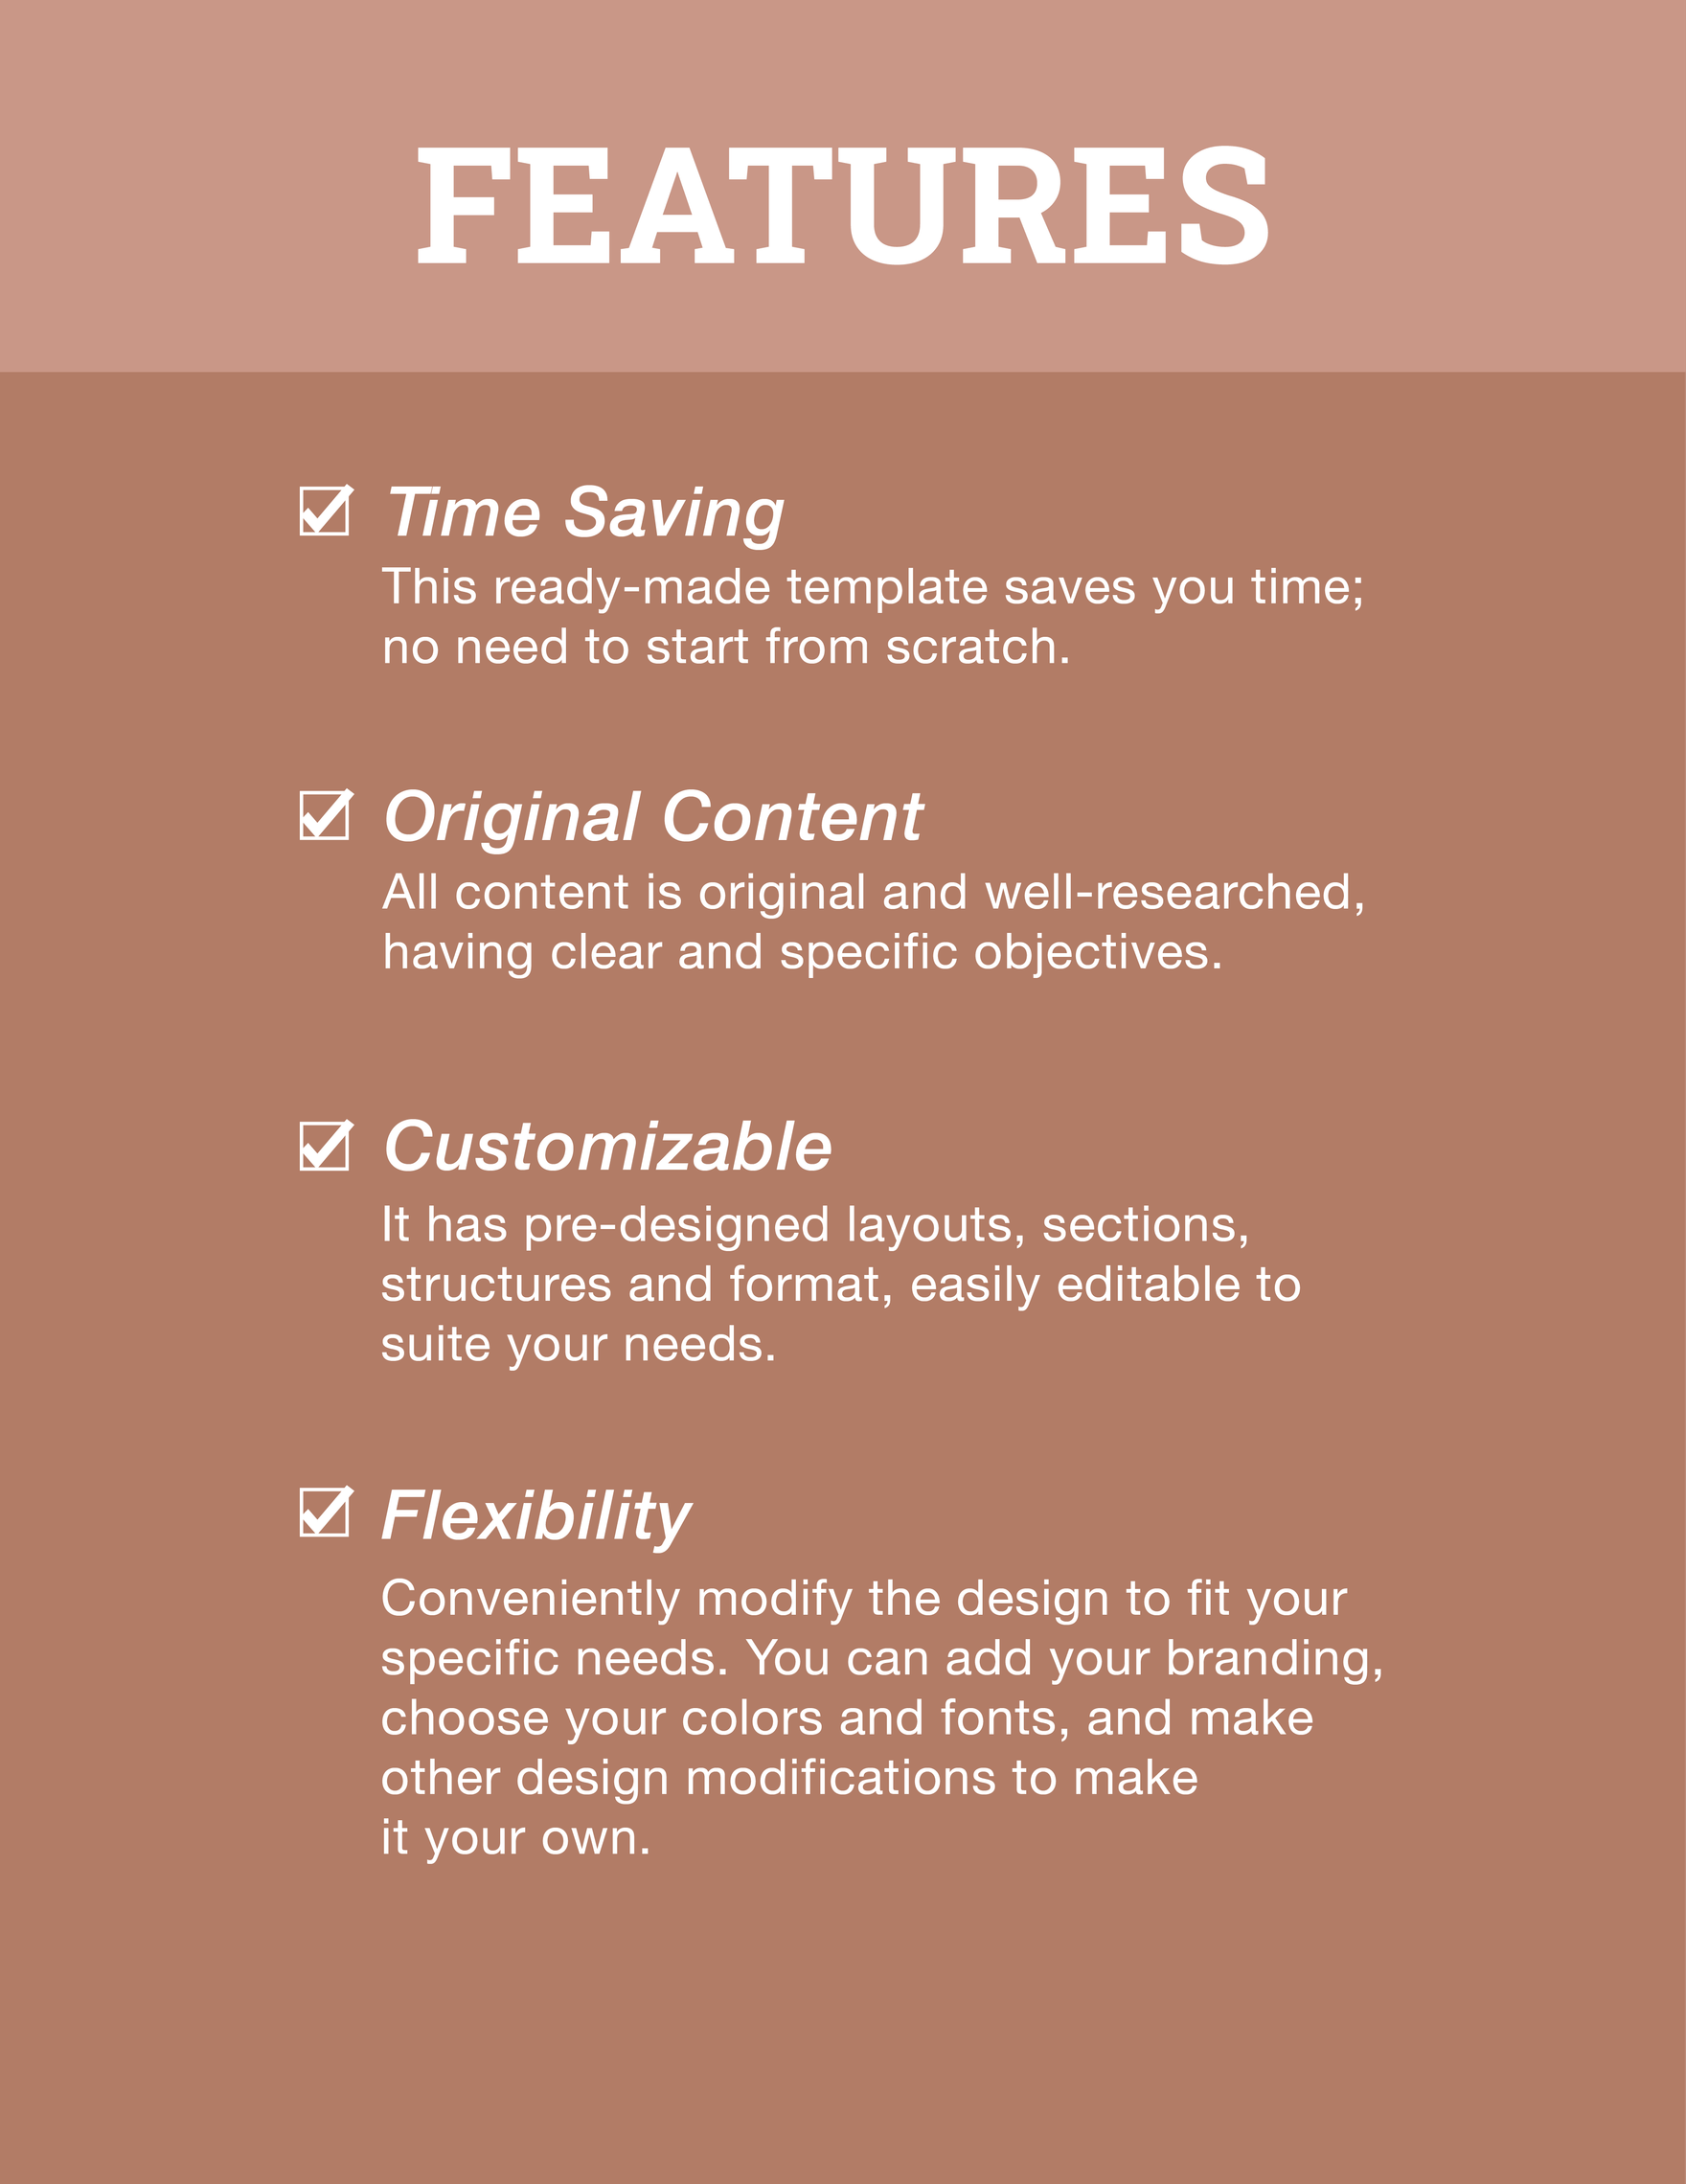 IT Service Contract Template